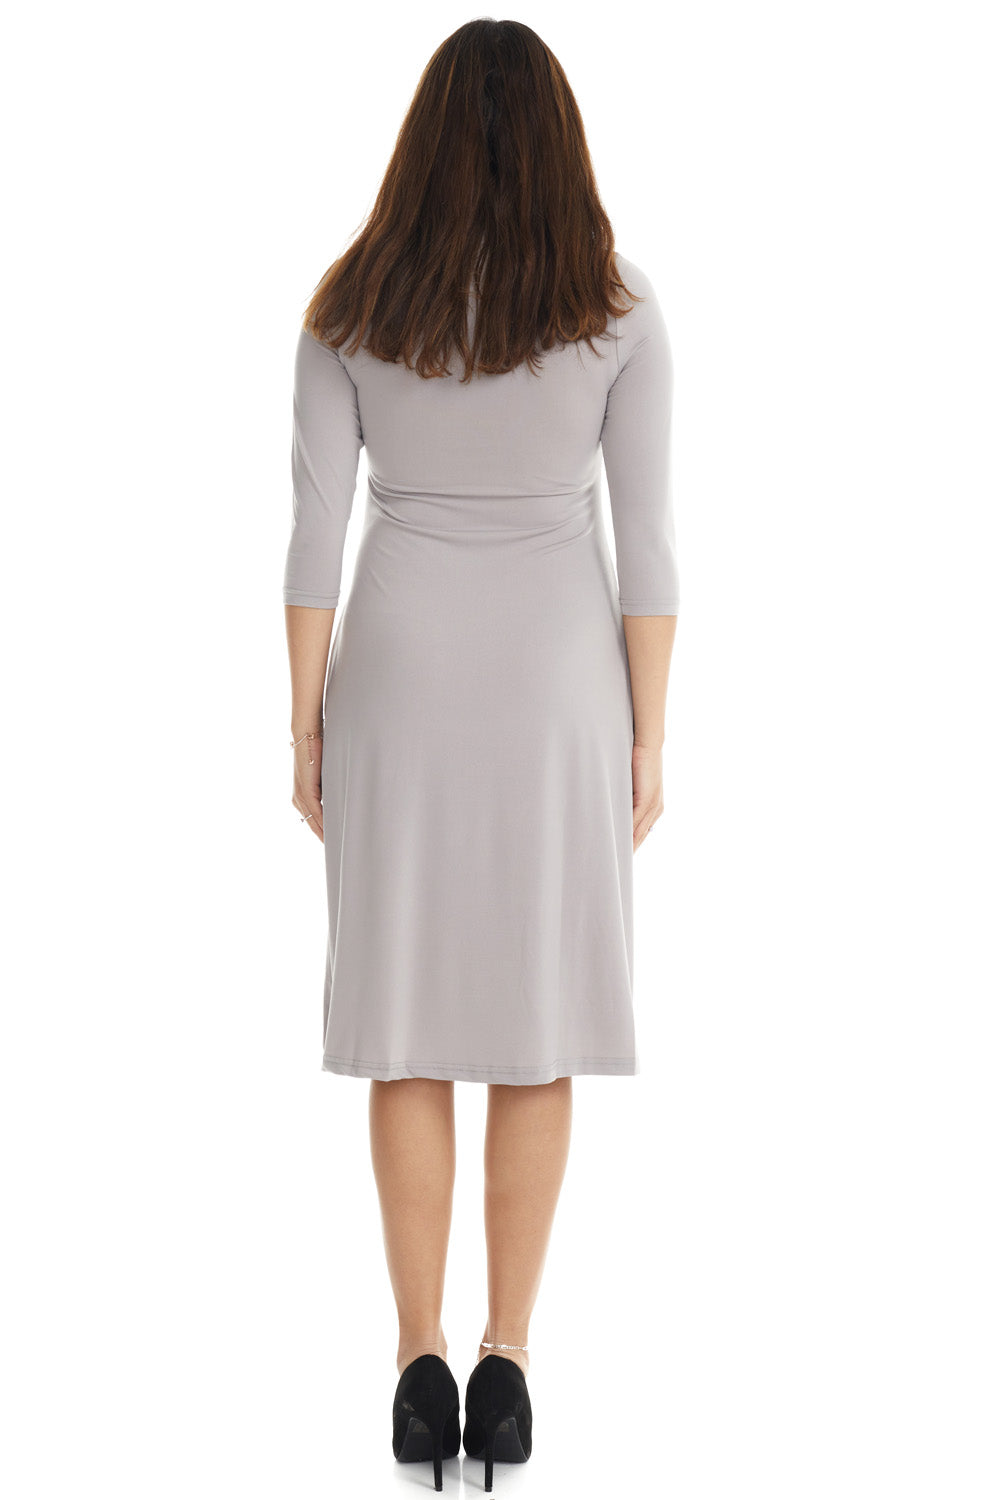 grey gray flary below knee length 3/4 sleeve crew neck modest tznius a-line dress with pockets big enough for smartphone